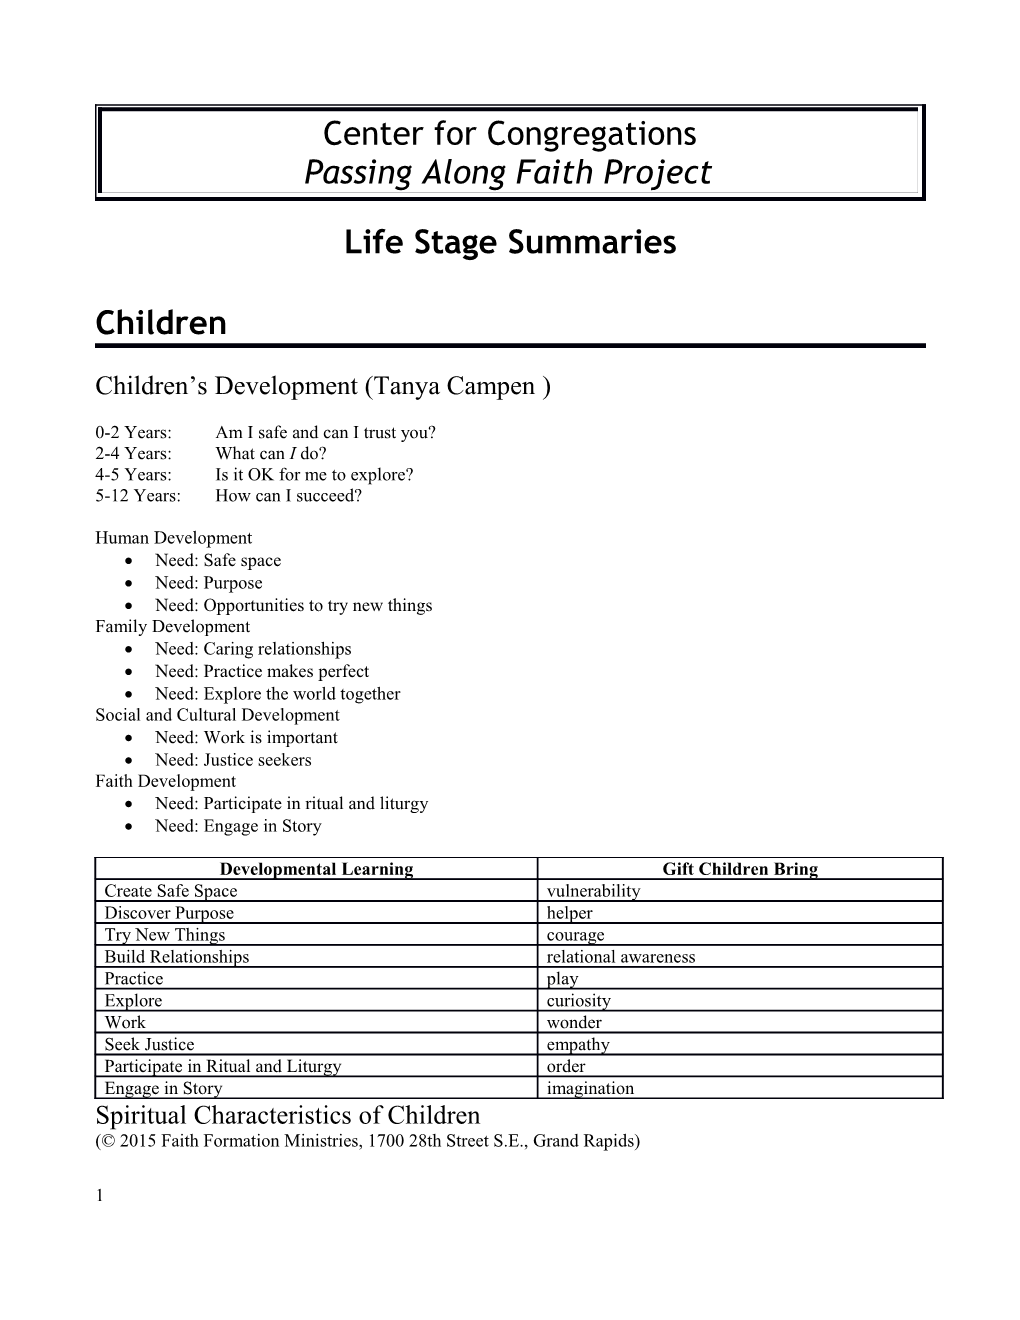 Passing Along Faith Project